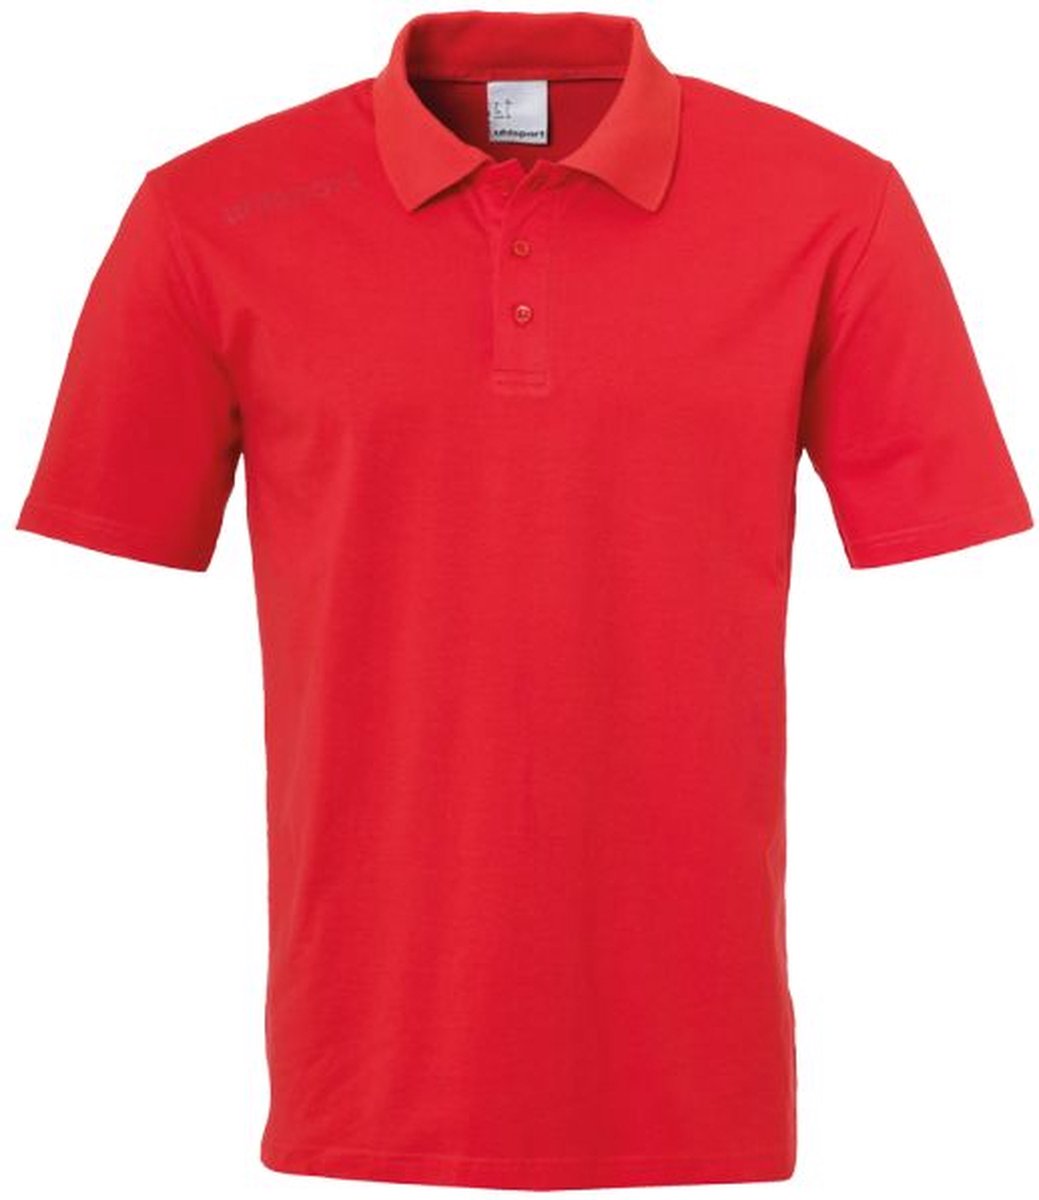 Uhlsport Essential Polo Shirt Rood Maat 3XL